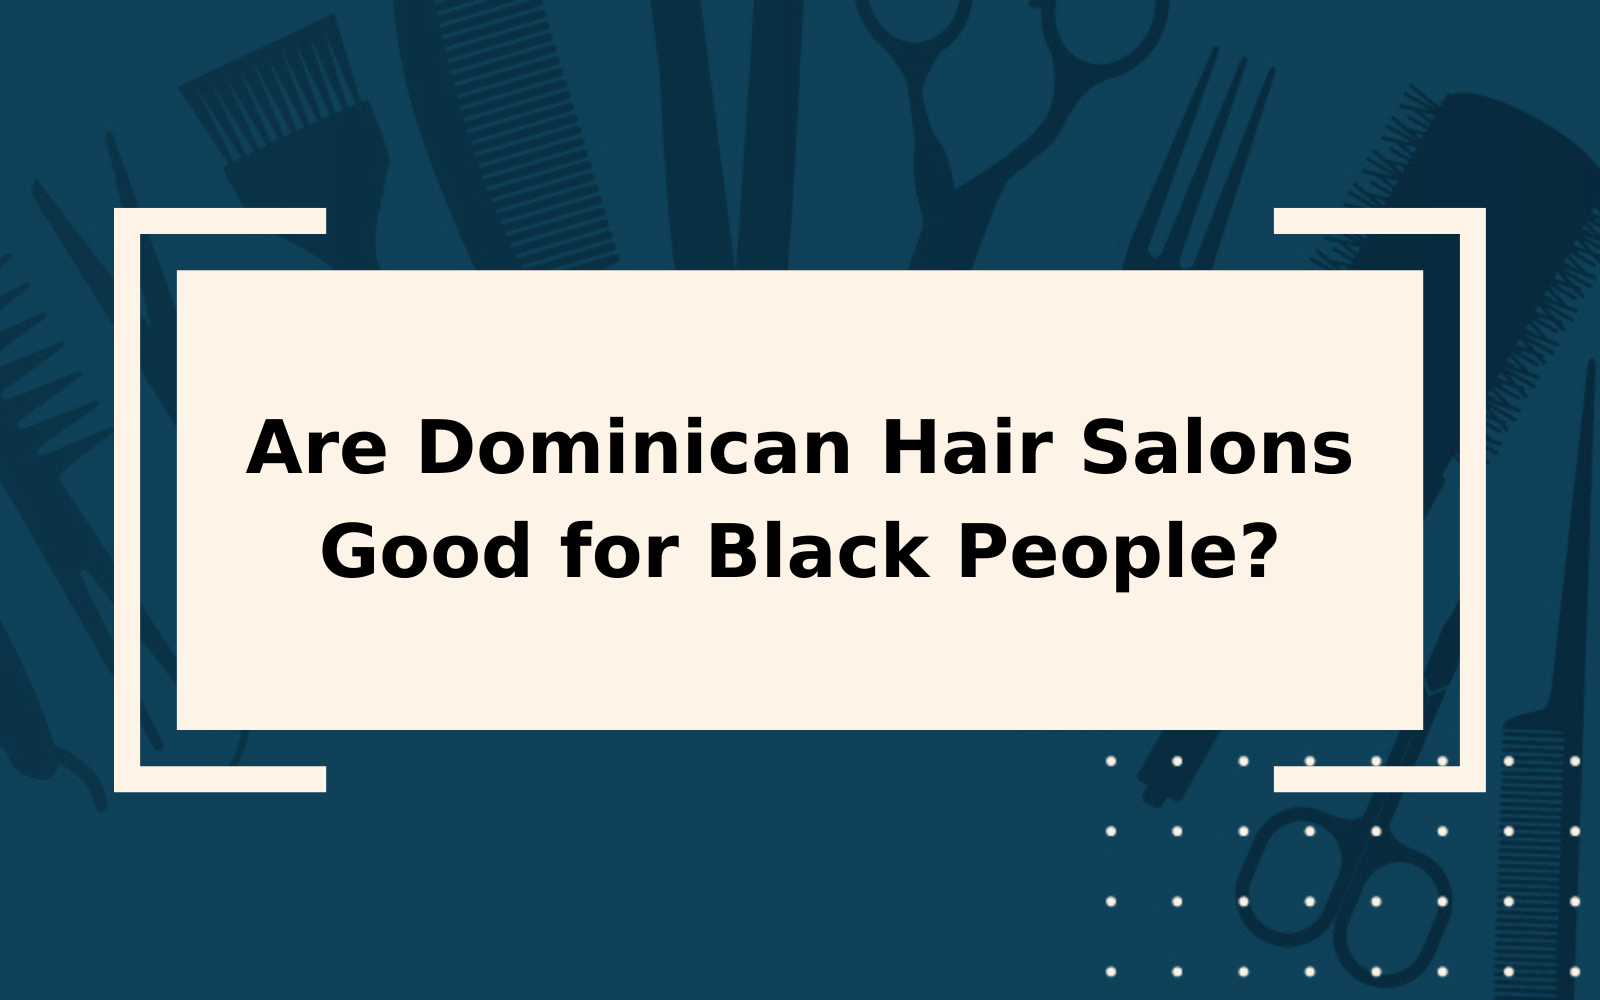 Are Dominican Hair Salons Good for Black People?